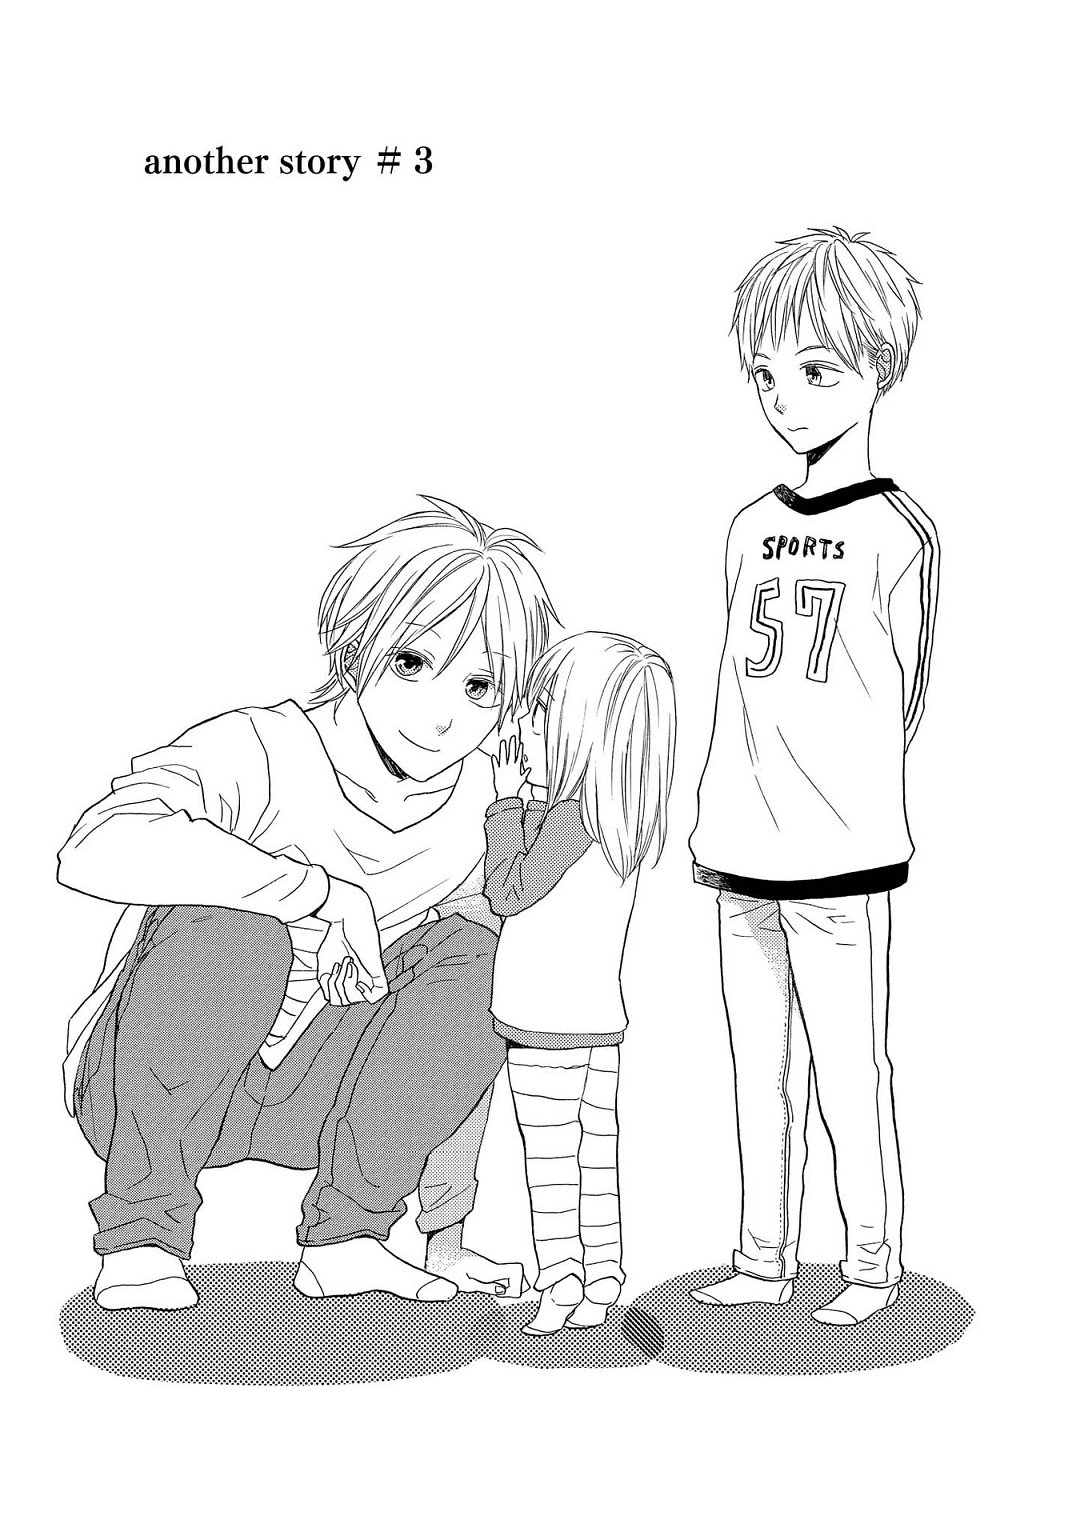 Bokura no Kiseki ~another stories~ Vol. 1 Ch. 3 another story #3